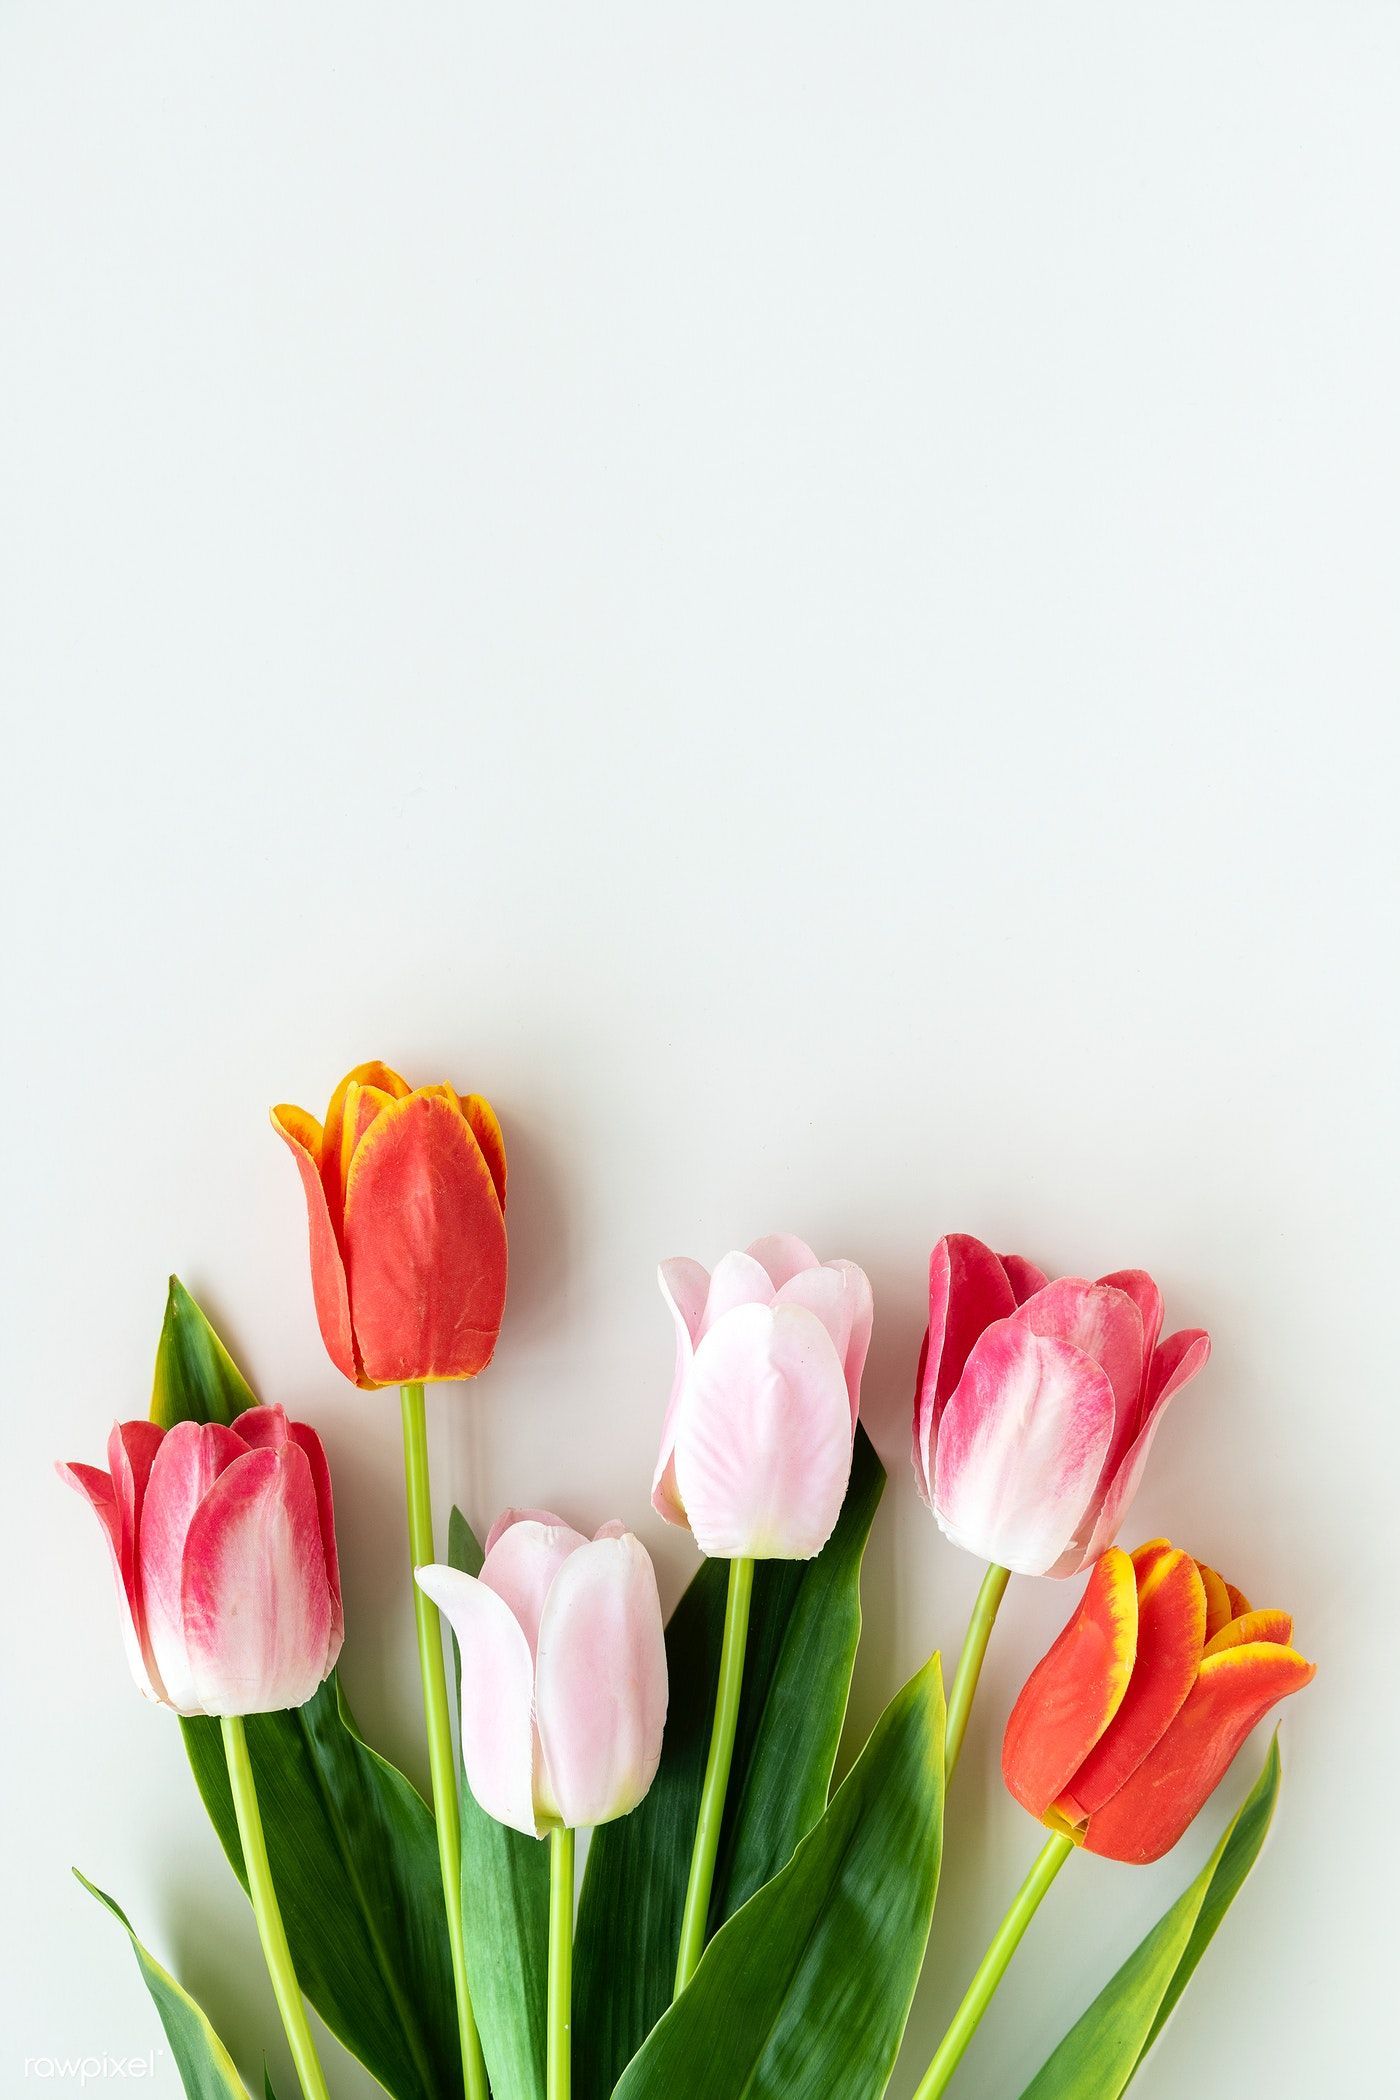 Download premium image of Pink and orange tulips on blank white background. Blank white background, Flower wallpaper, Spring wallpaper